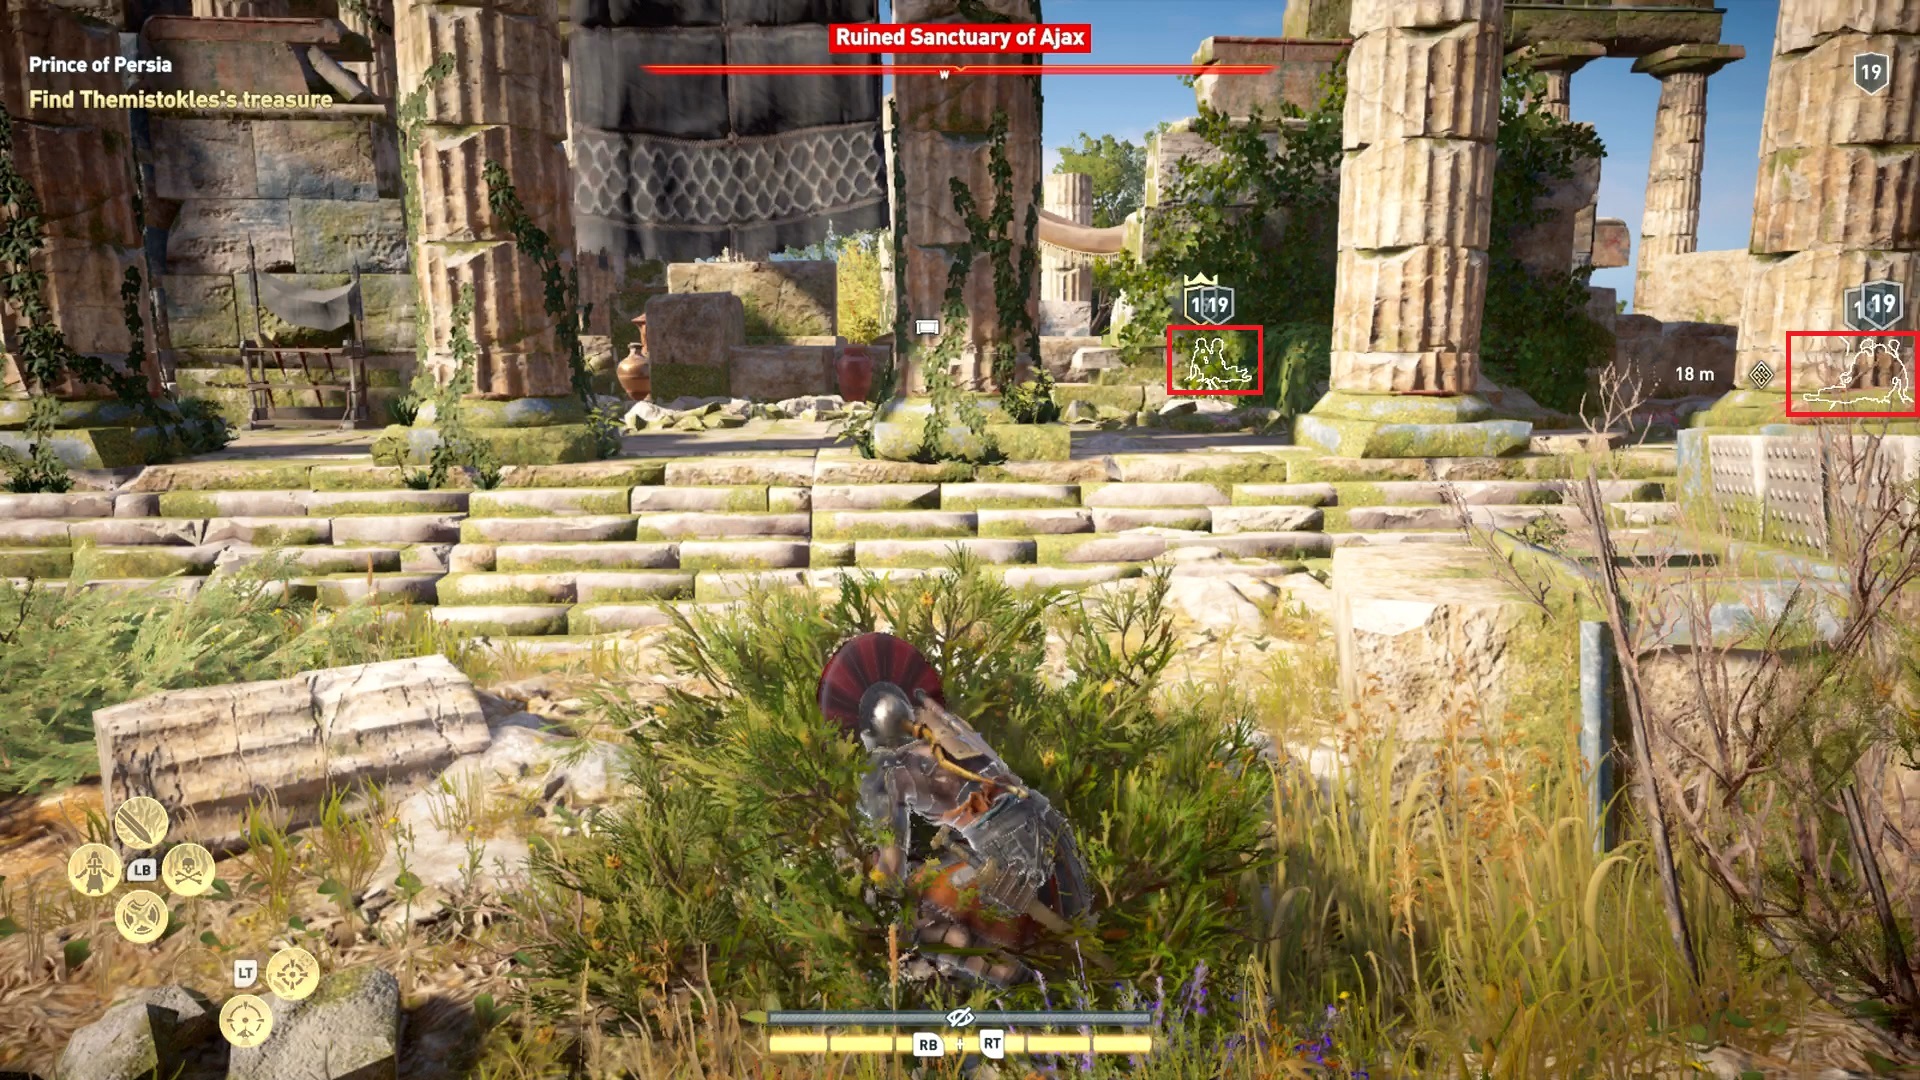 Assassin's Creed Odyssey HUD Game Settings Guide - Customization